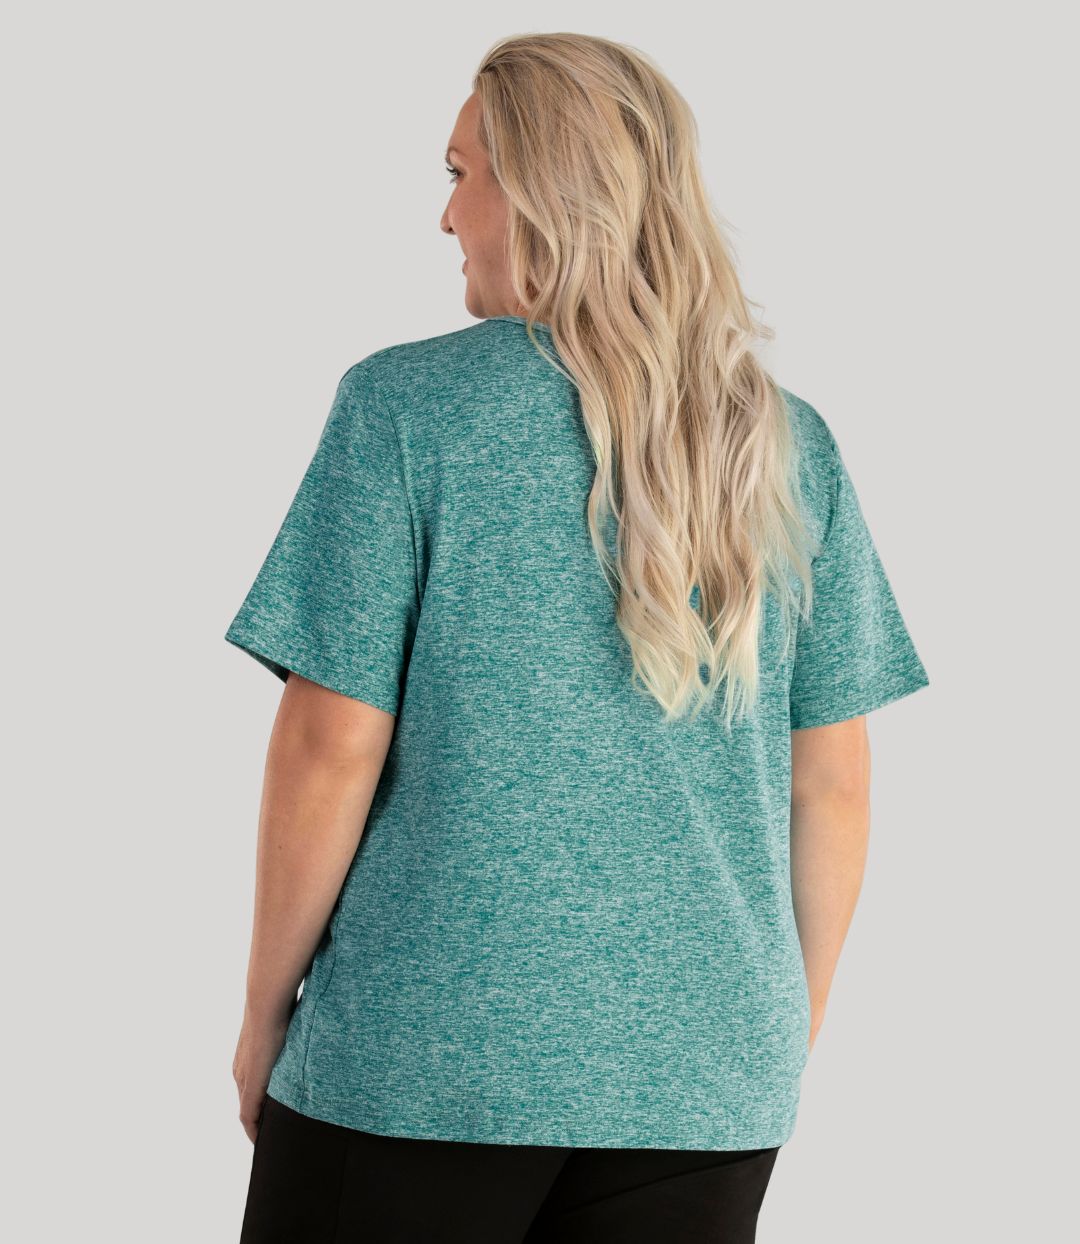 Plus size woman, facing back, wearing JunoActive plus size SoftWik V-Neck Tee in the color Heather Emerald. She is wearing JunoActive Plus Size Leggings in the color Black.